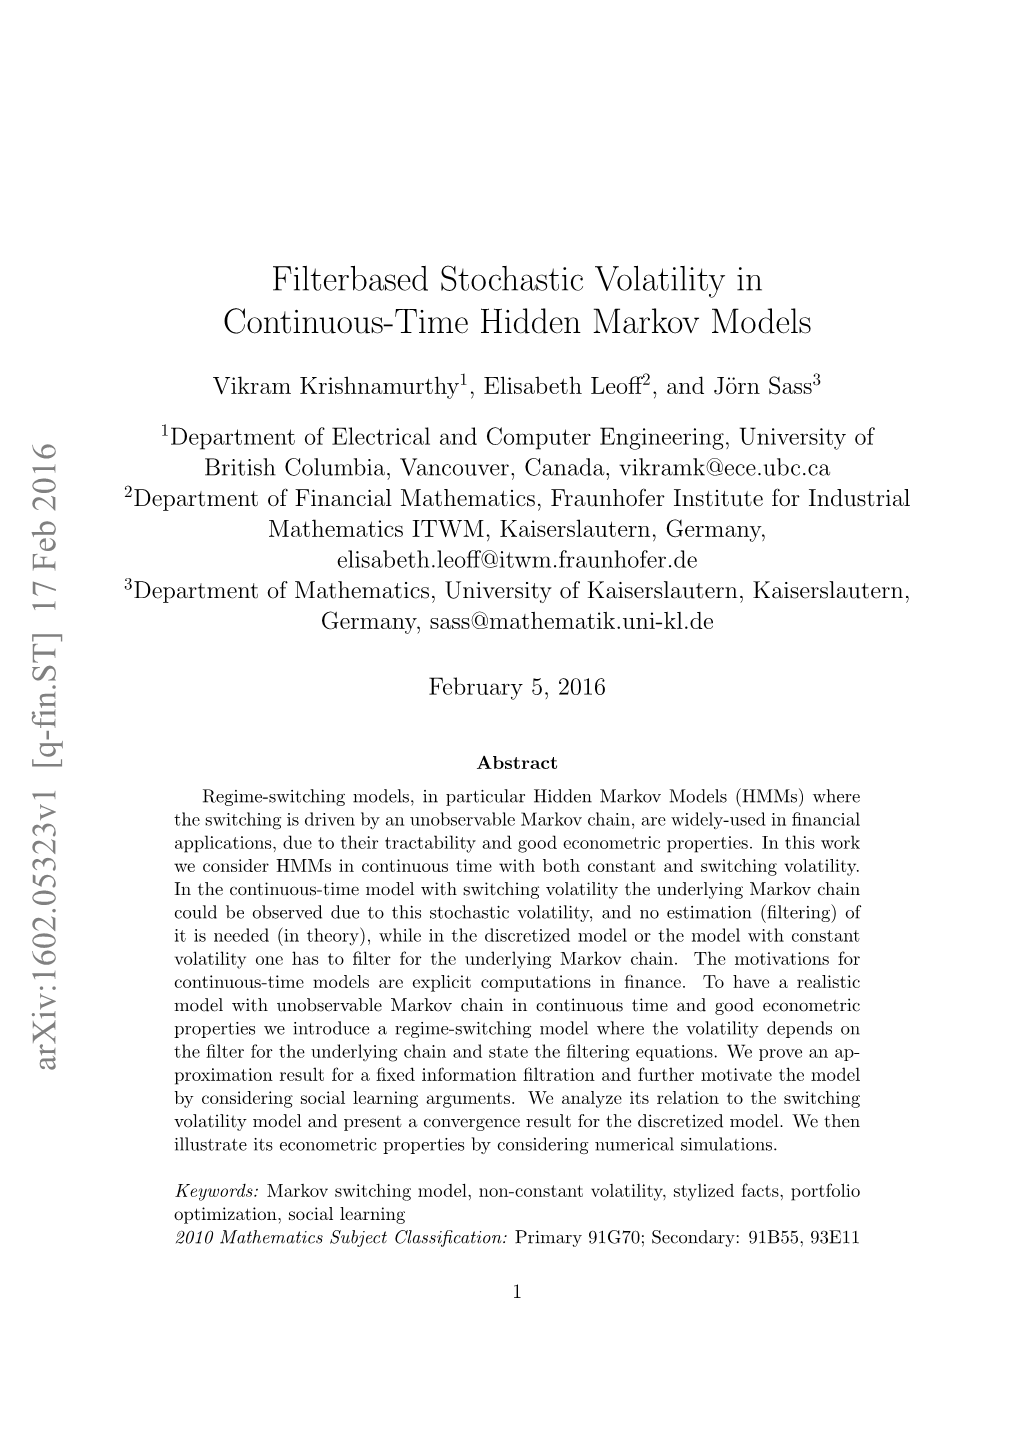 Filterbased Stochastic Volatility in Continuous-Time Hidden Markov Models